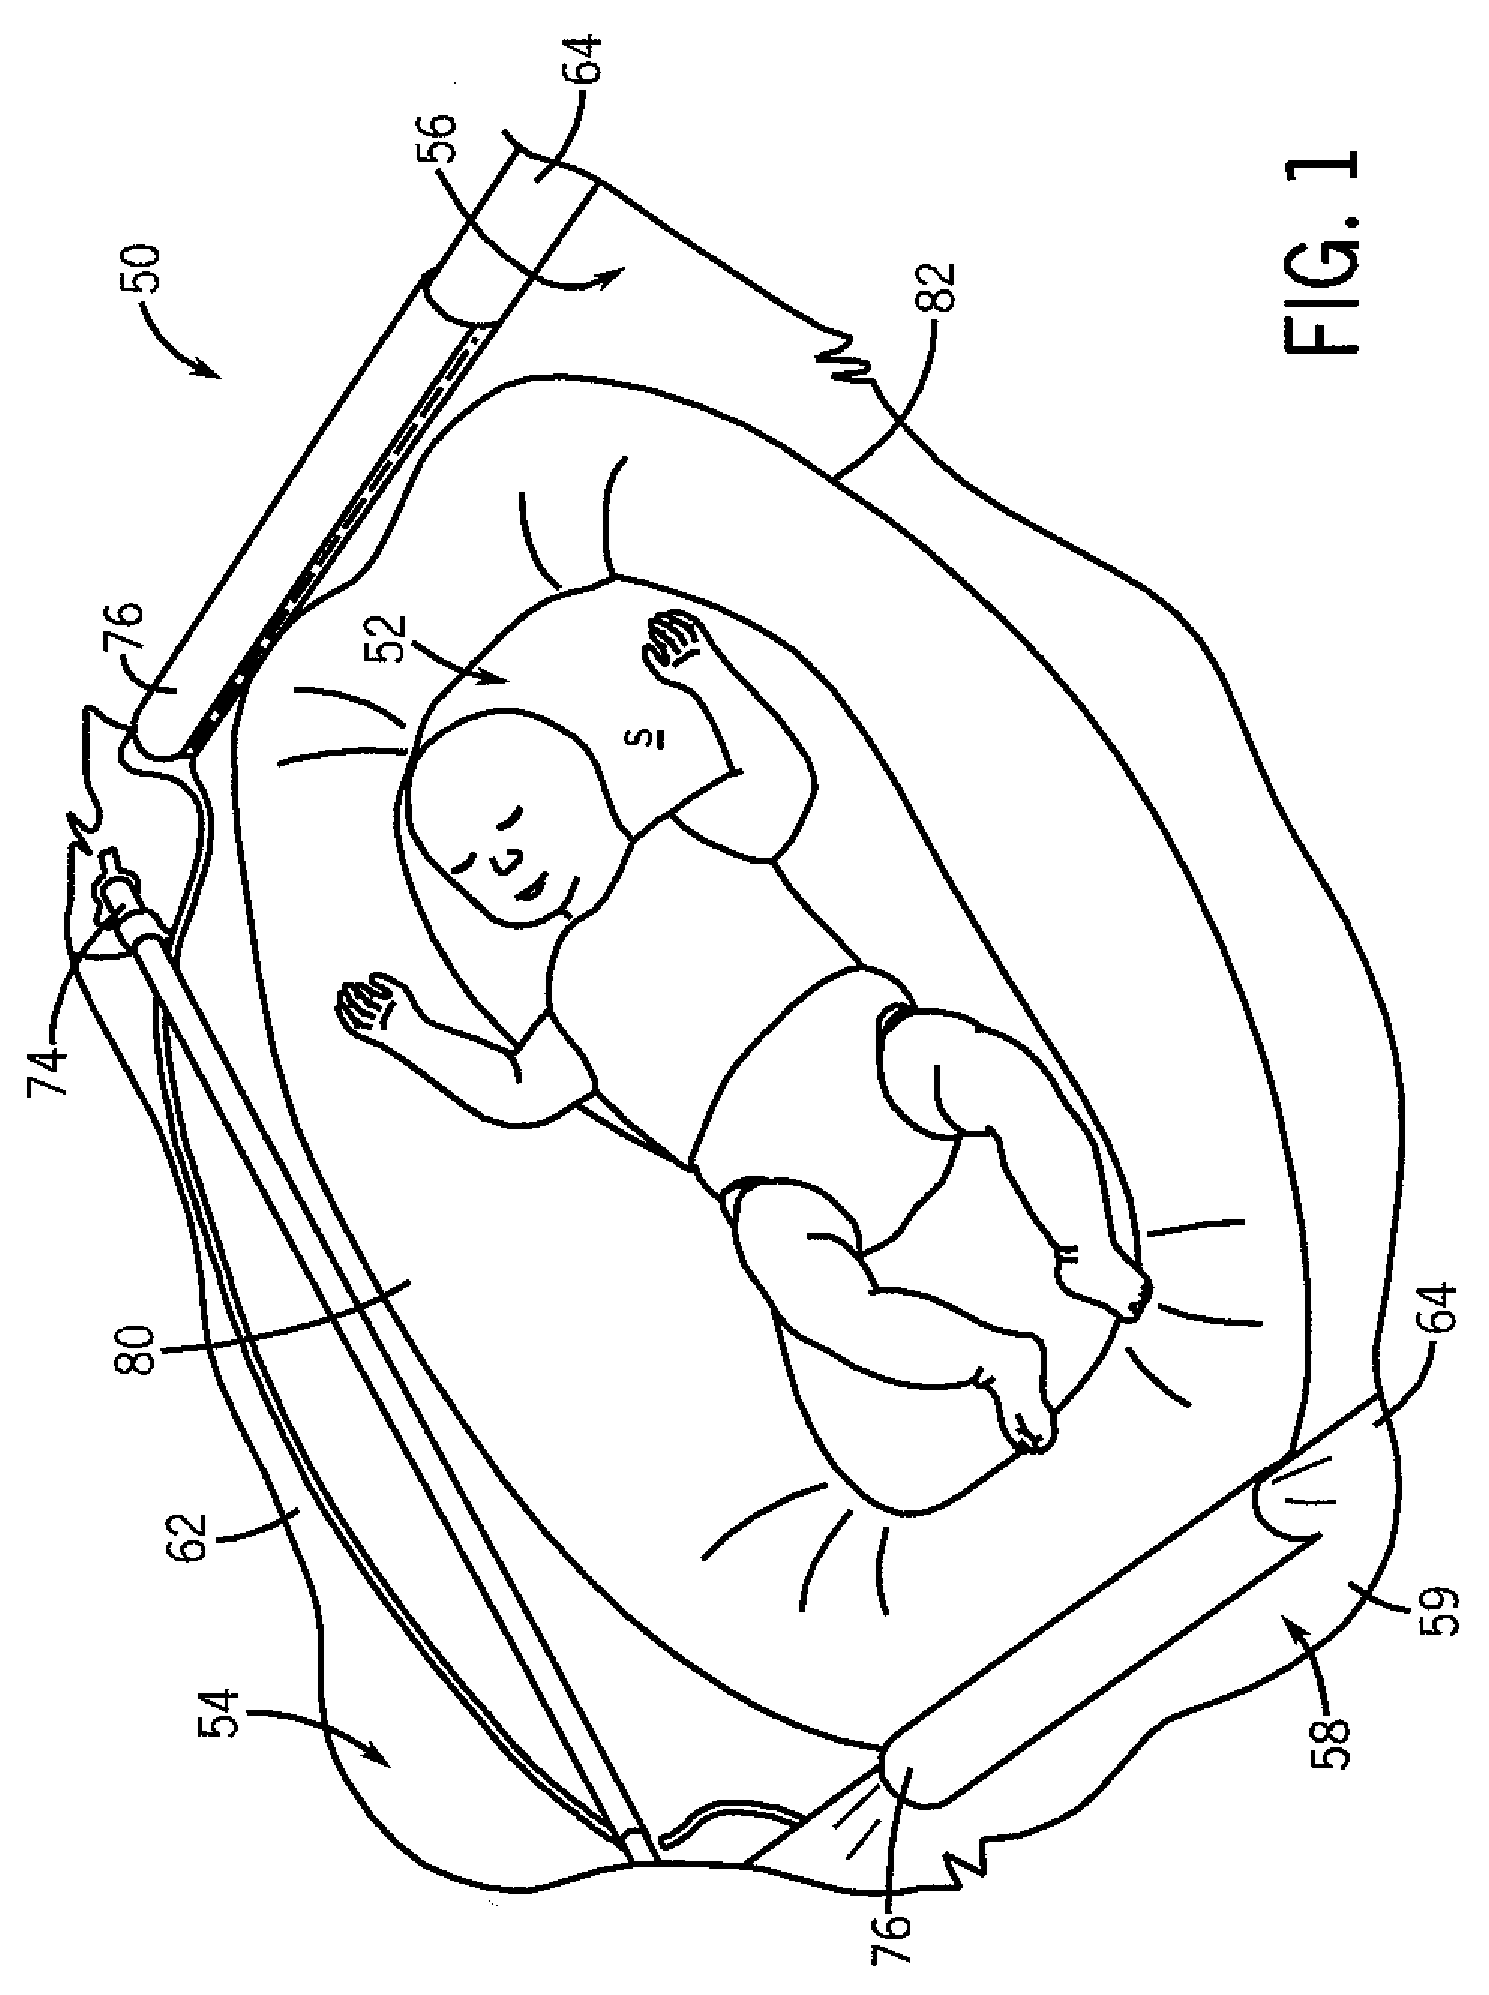 Infant sleeping apparatus and child containment system